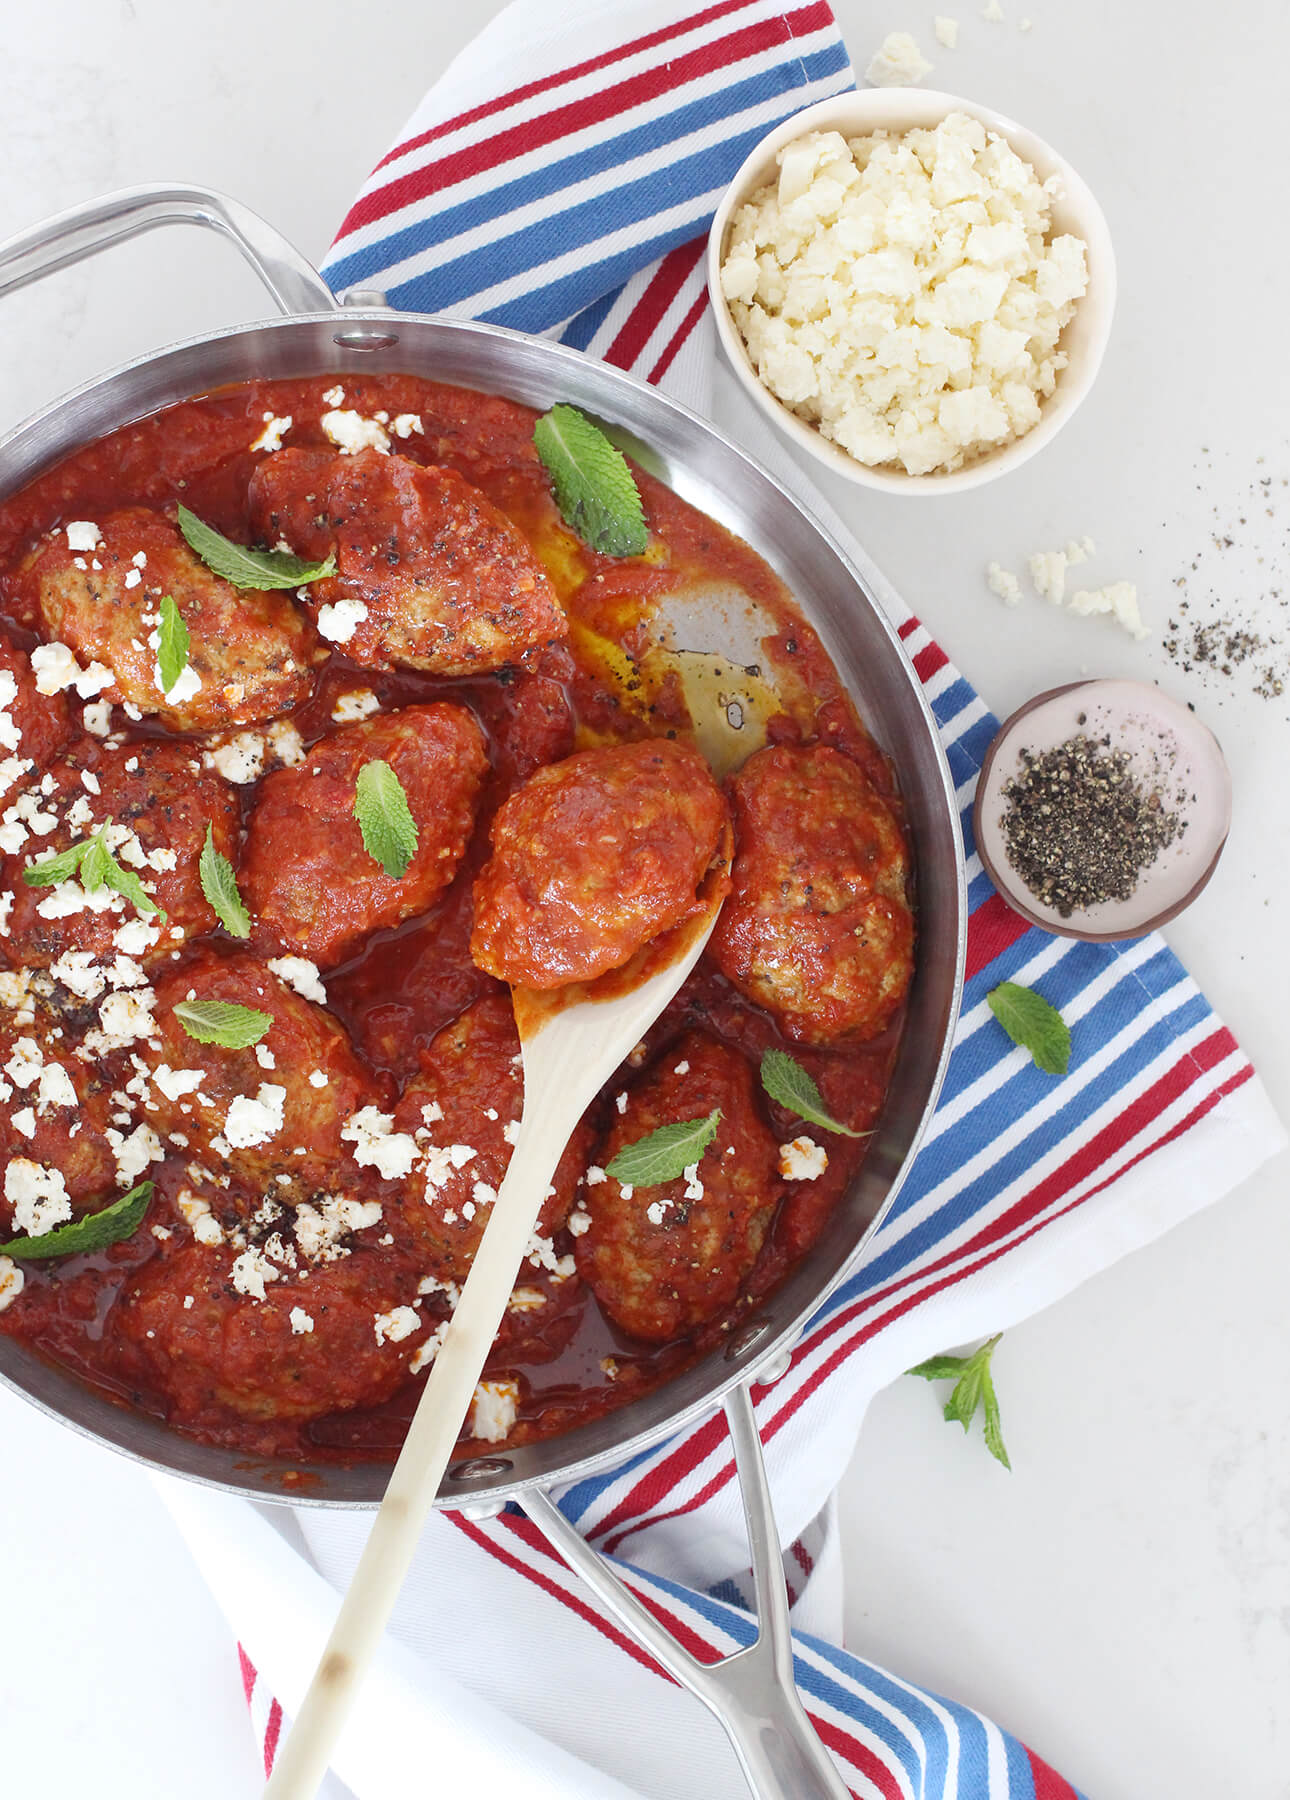 These Greek meatballs are hearty, tender and moist, and they come nestled in an intriguingly spiced tomato sauce